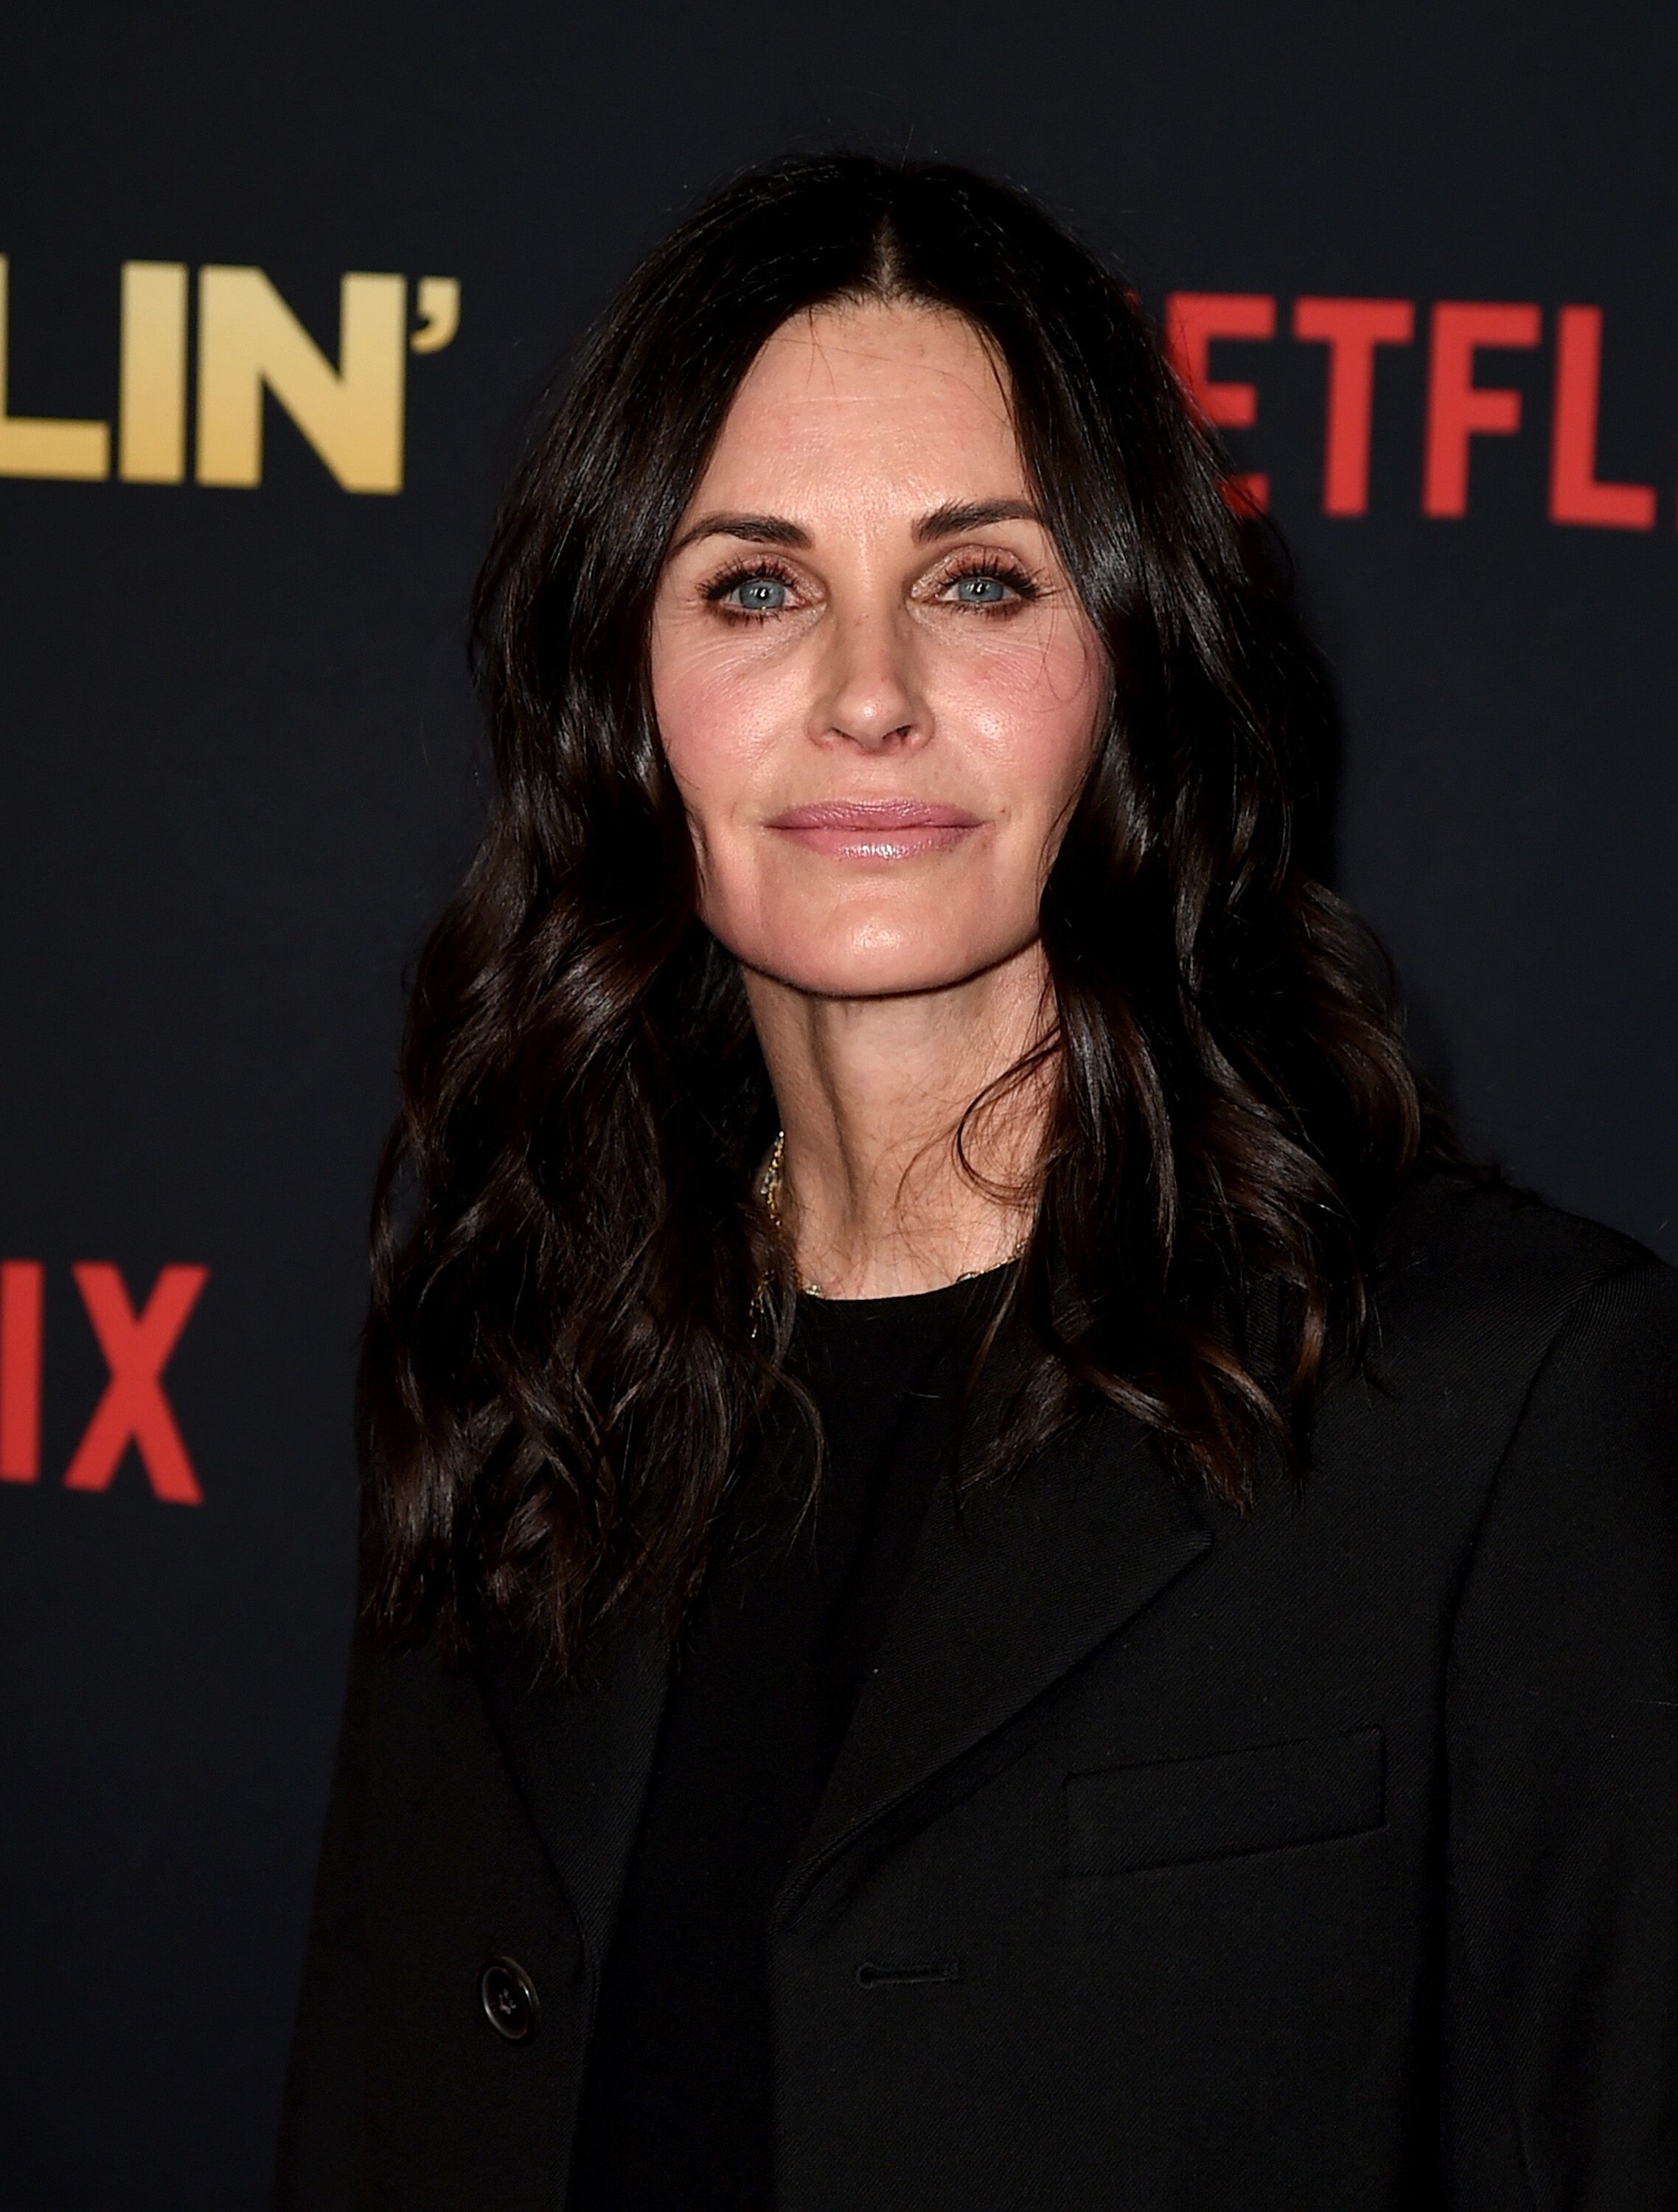 Courteney Cox arrives at the premiere of Netflix's "Dumplin'" at the Chinese Theater. | Source: Getty Images